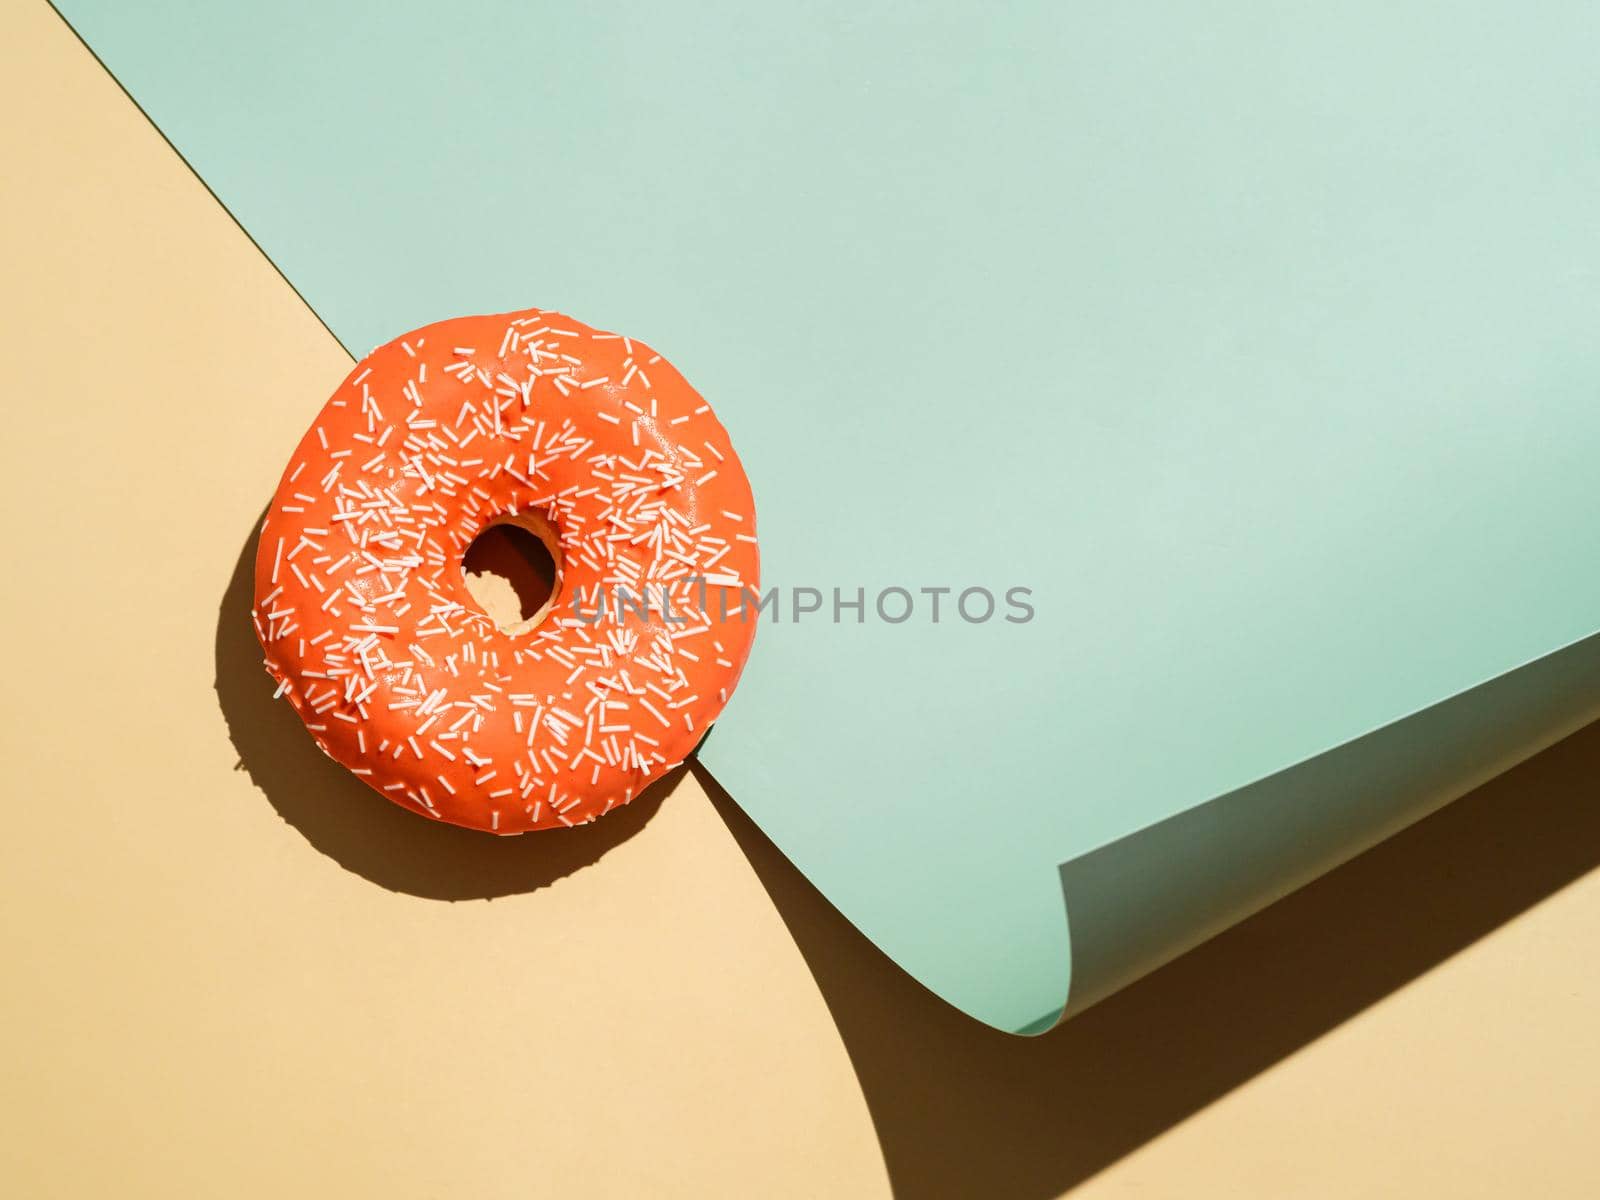 Glazed donuts on colorful background, top view by fascinadora